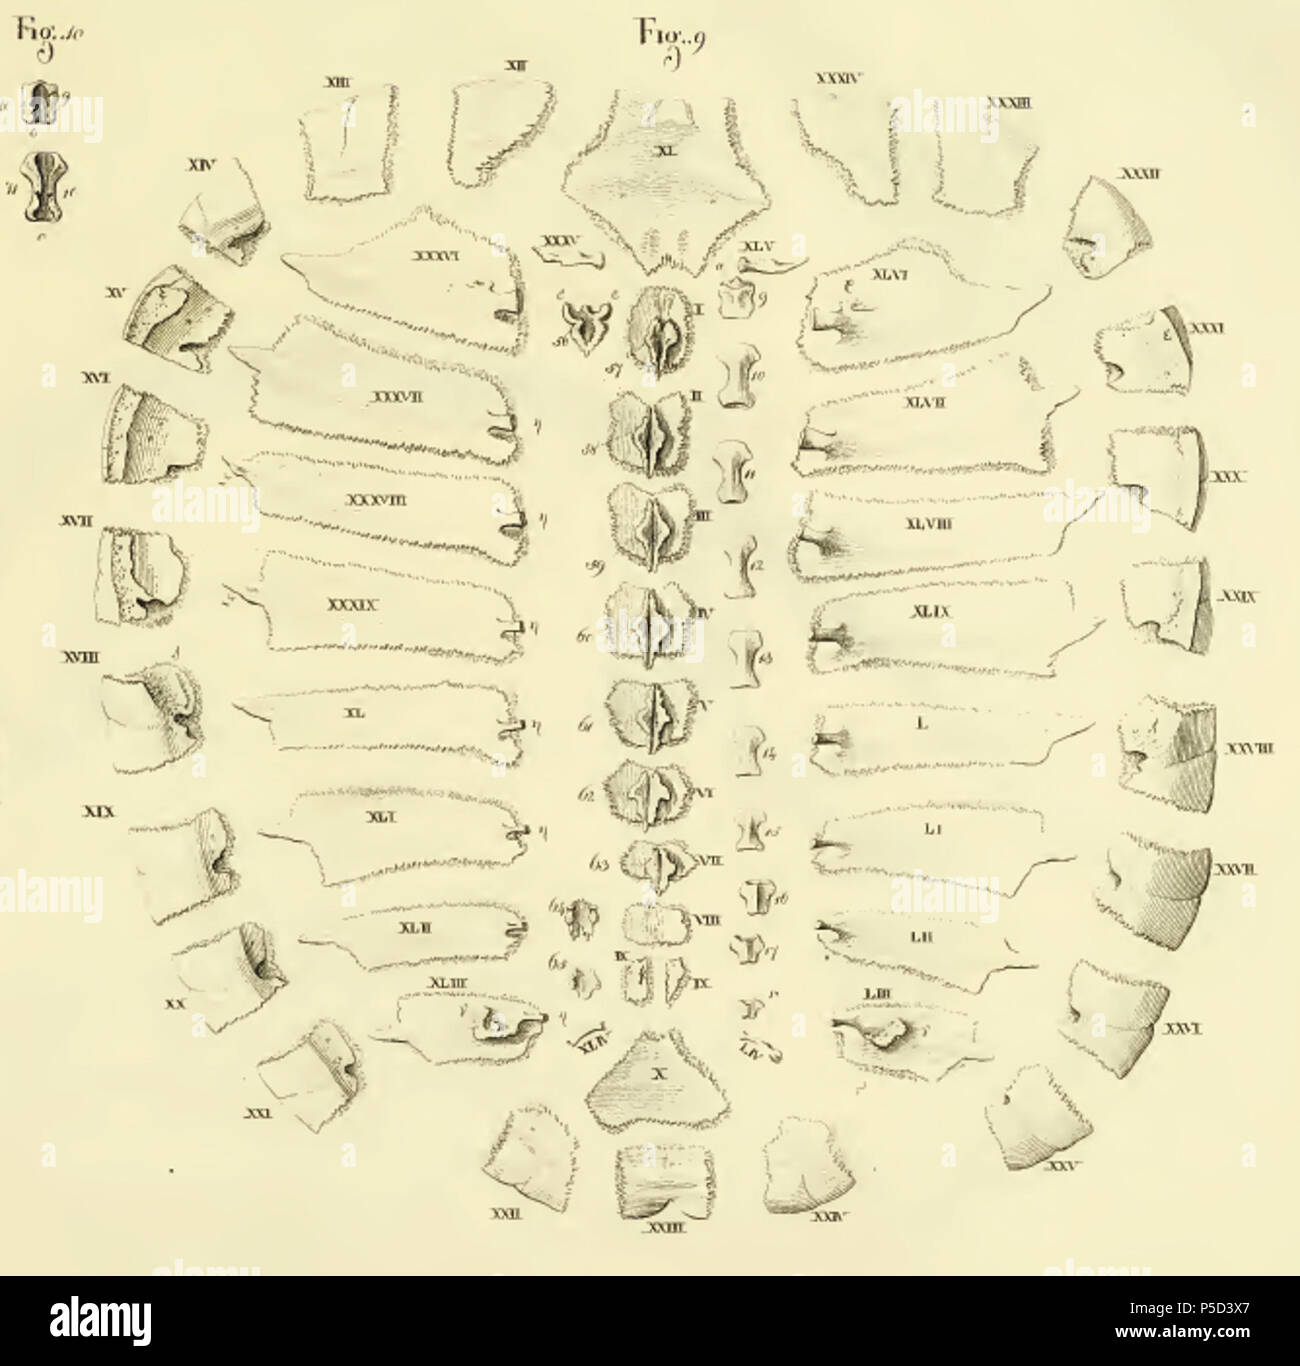 N/A. English: Fig 9 from Bojanus (1819) Exploded view of turtle carapace, Emys orbicularis Legend: (i) Neural 1, (ii) Neural 2, (iii) Neural 3, (iv) Neural 4, (v) Neural 5, (vi) Neural 6, (vii) Neural 7, (viii) Neural 8, (ix) extra neural, divided, (x) suprapygal, (xi) nuchal, (xii) right peripheral 1, (xiii) right peripheral 2, (xiv) right peripheral 3, (xv) right peripheral 4, (xvi) right peripheral 5, (xvii) right peripheral 6, (xviii) right peripheral 7, (xix) right peripheral 8, (xx) right peripheral 9, (xxi) right peripheral 10, (xxii) right peripheral 11, (xxiii) pygal, (xxiv) left peri Stock Photo